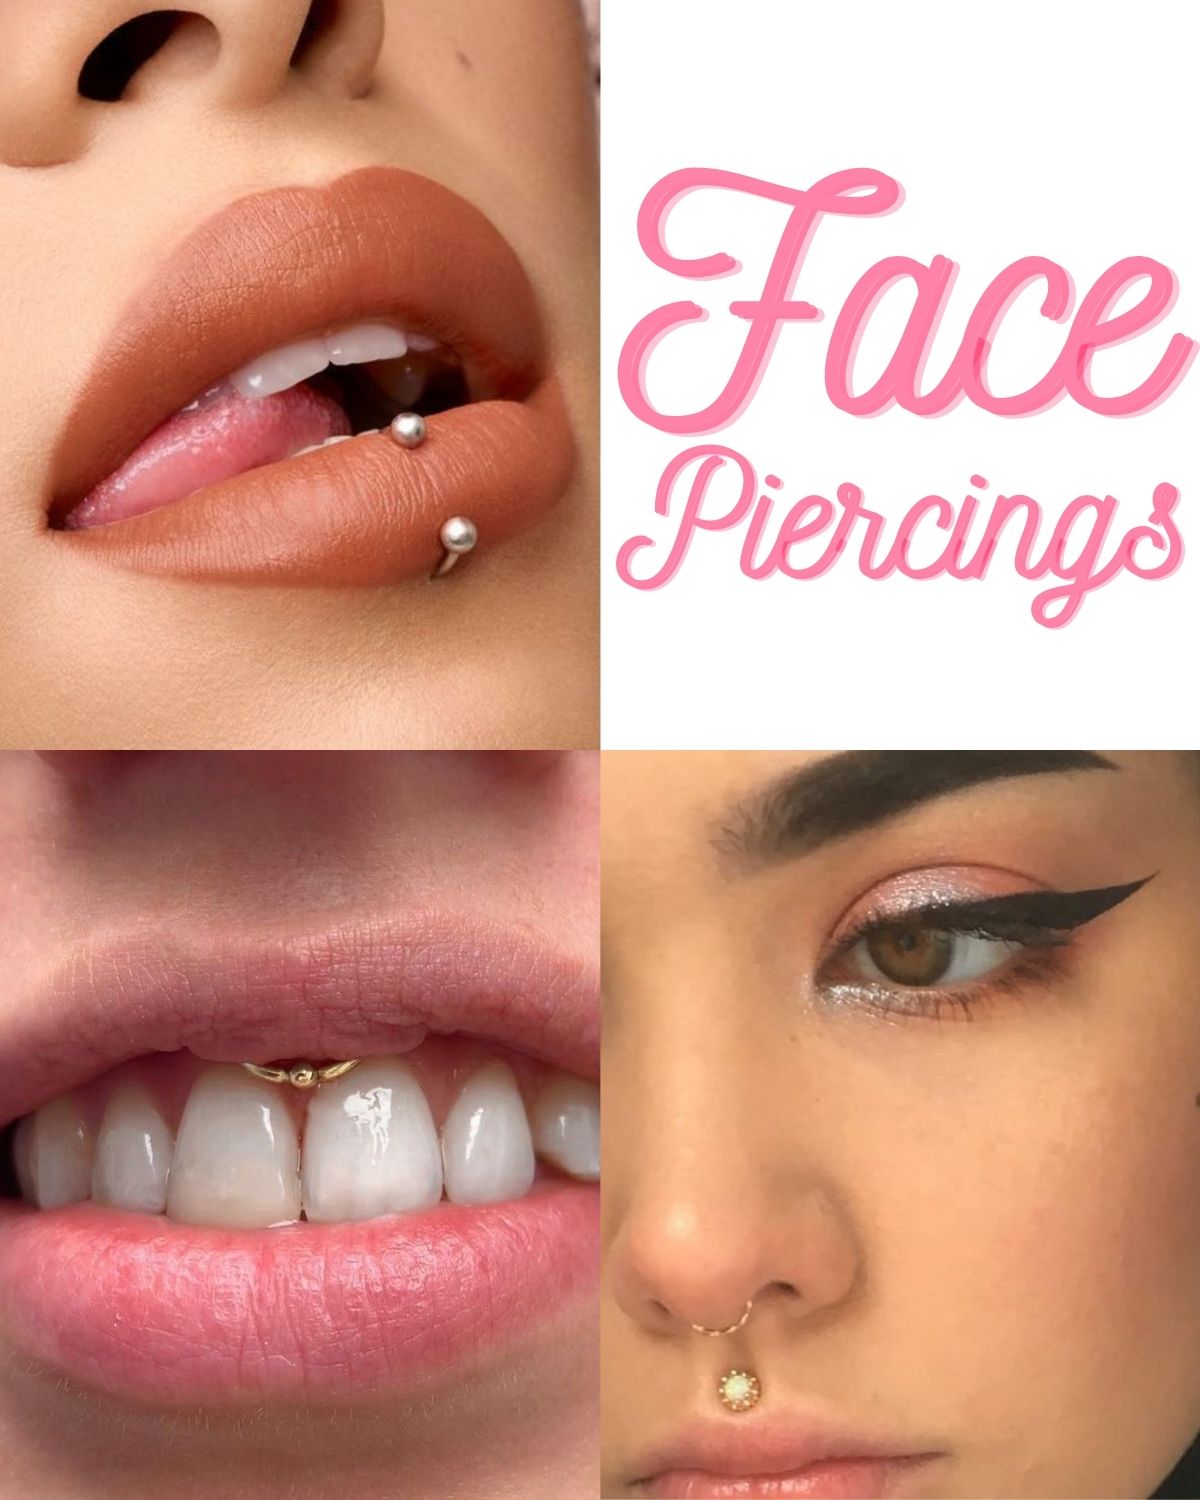 Face piercing questions answered how much does it hurt